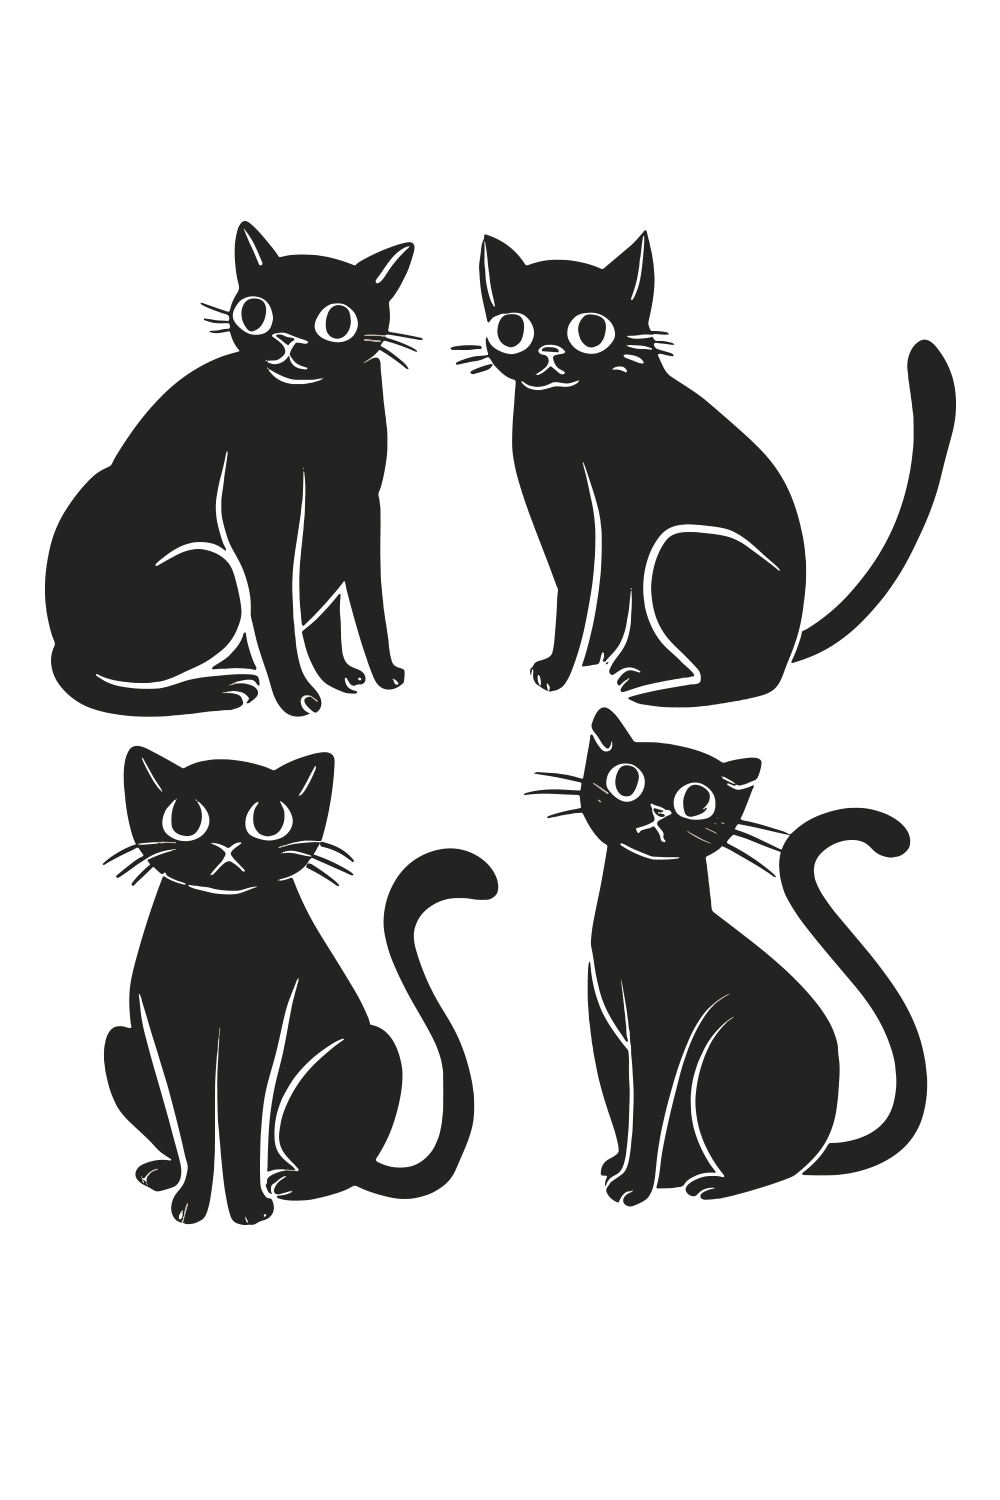 Hand drawn cat silhouette set pinterest preview image.